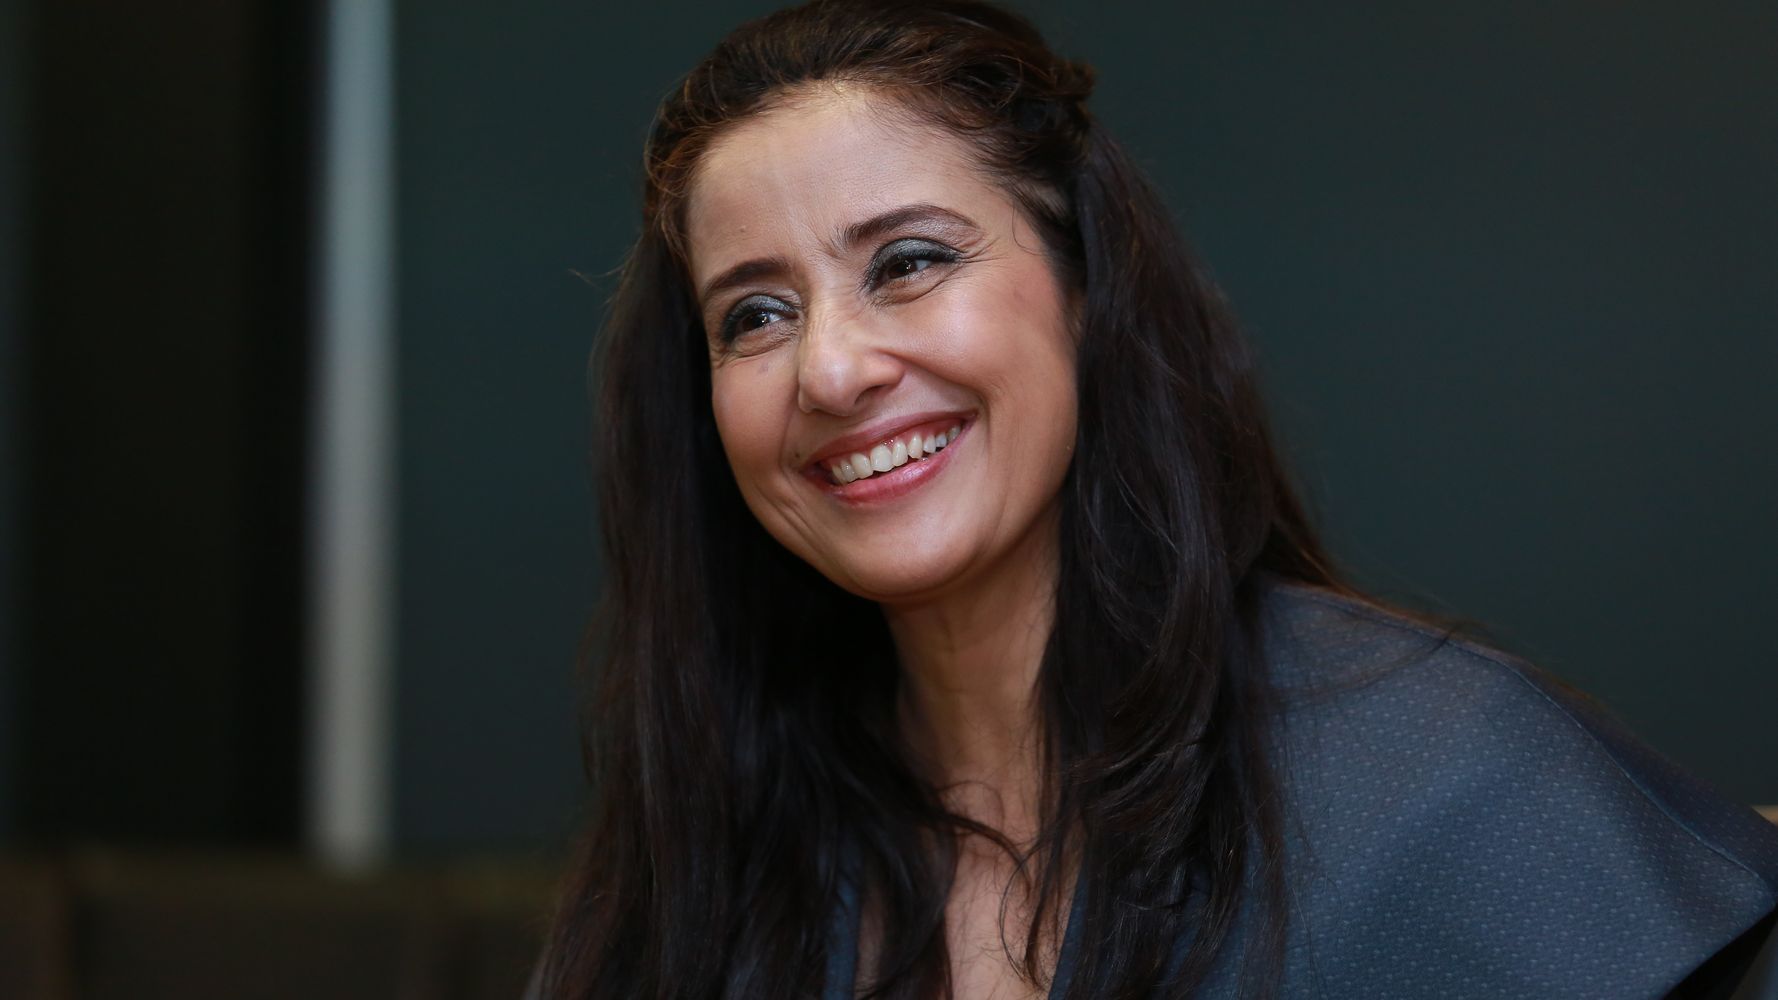 Xnxx Manisha Koirala - Manisha Koirala On The Sexism Of The 90s, Her Second Innings In Bollywood,  And Her Fallout With Subhash Ghai | HuffPost Entertainment